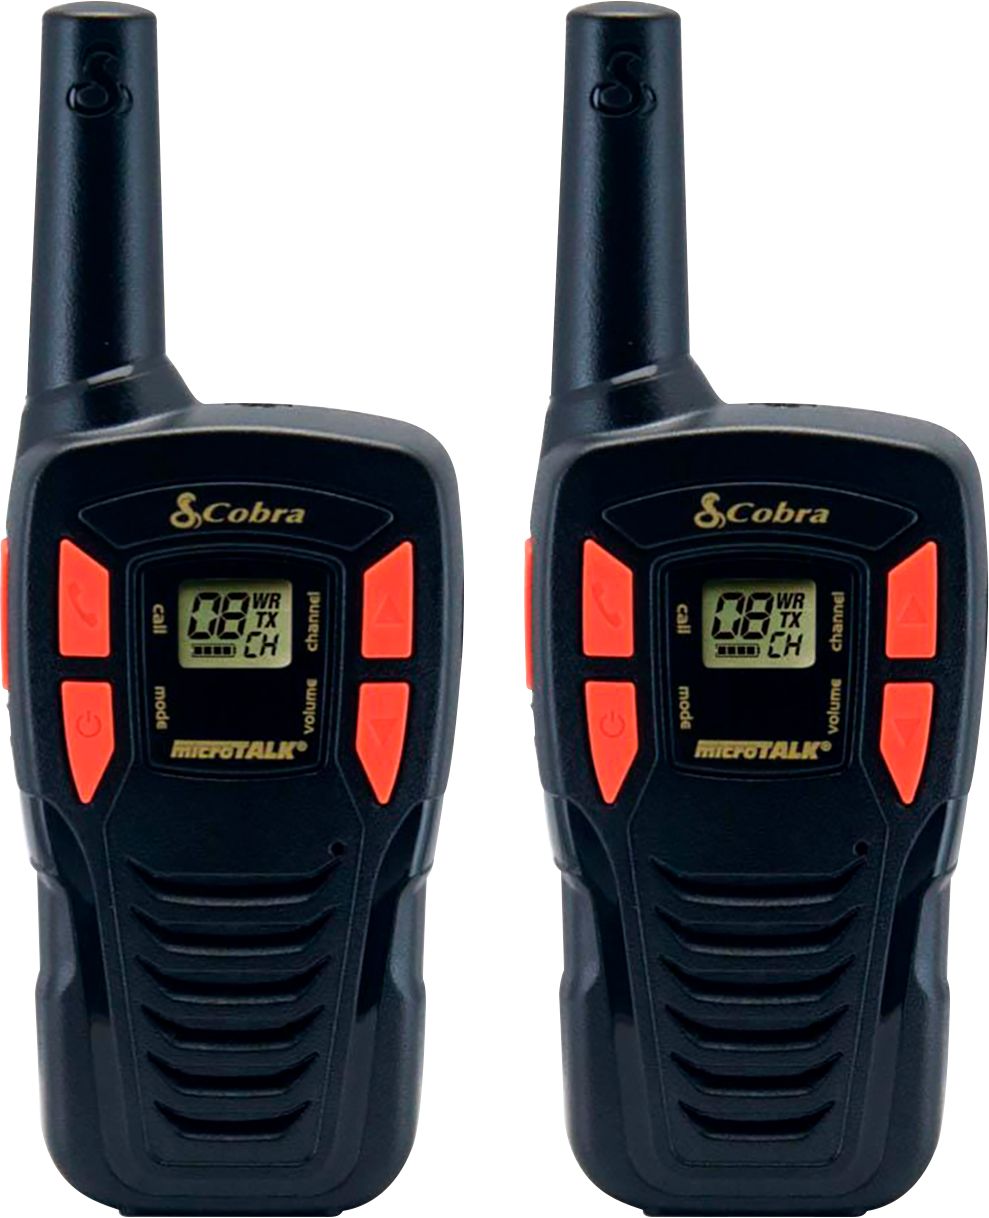 Angle View: Cobra - 16-Mile 22-Channel FRS/GMRS 2-Way Radio (Pair) - Black